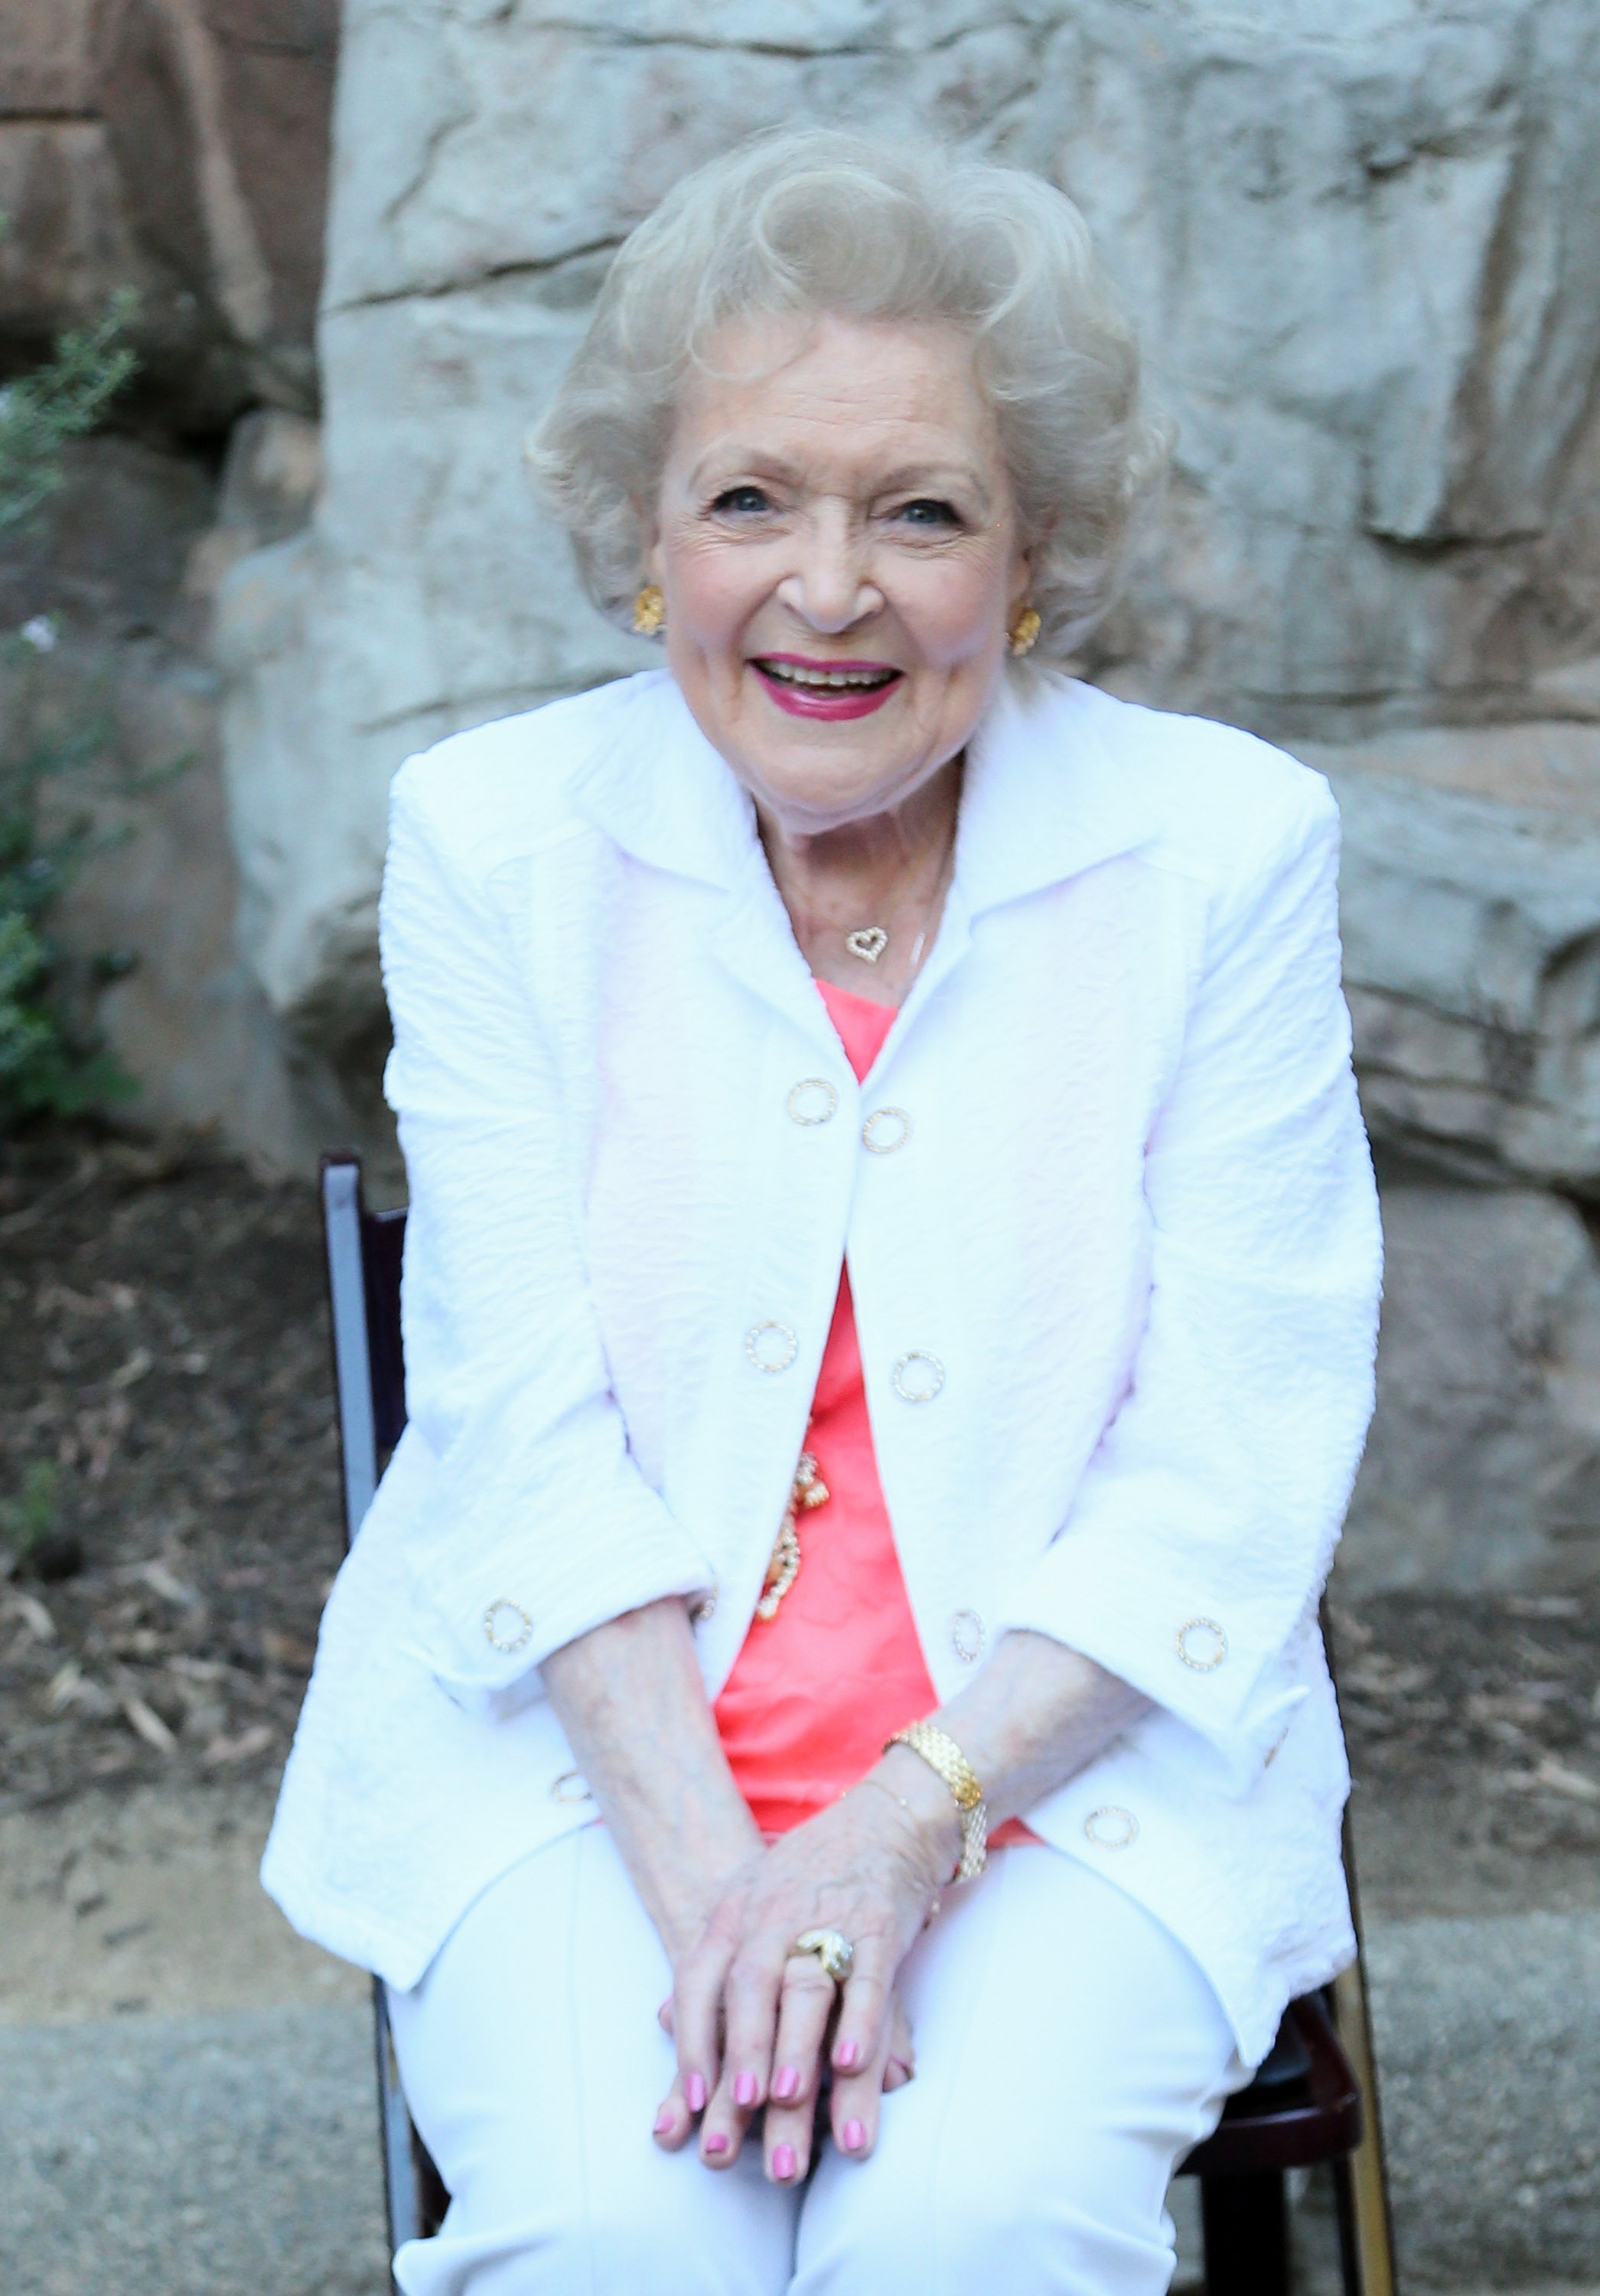 Betty White attends the Greater Los Angeles Zoo Association's (GLAZA) 45th Annual Beastly Ball on June 20, 2015, in Los Angeles, California. | Source: Getty Images.